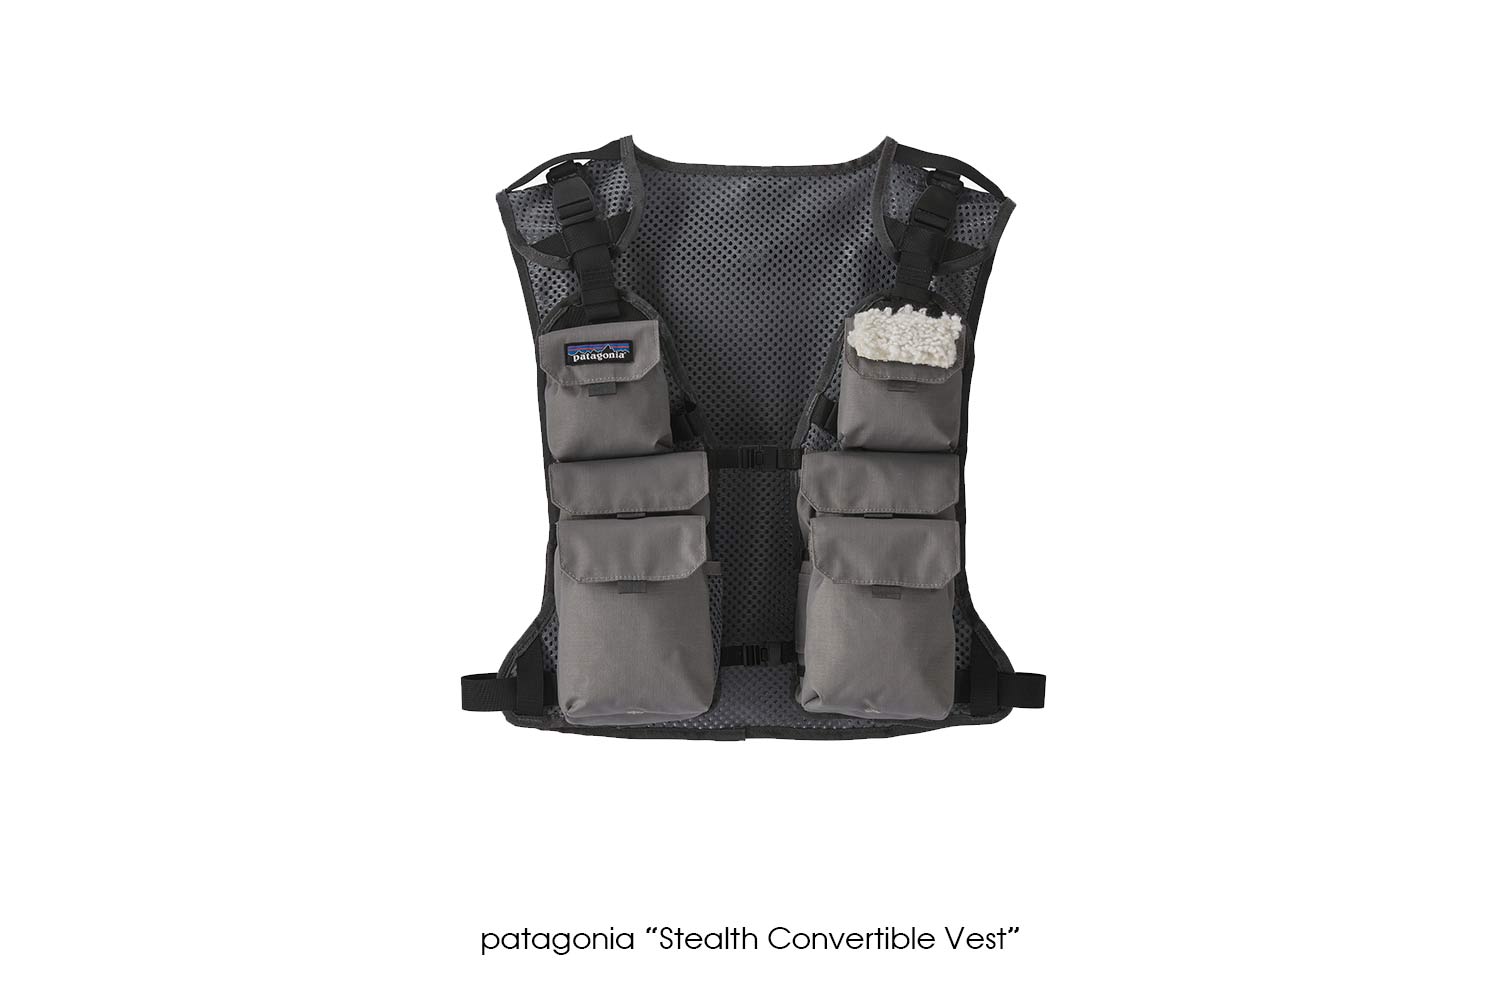 patagonia "Stealth Convertible Vest"